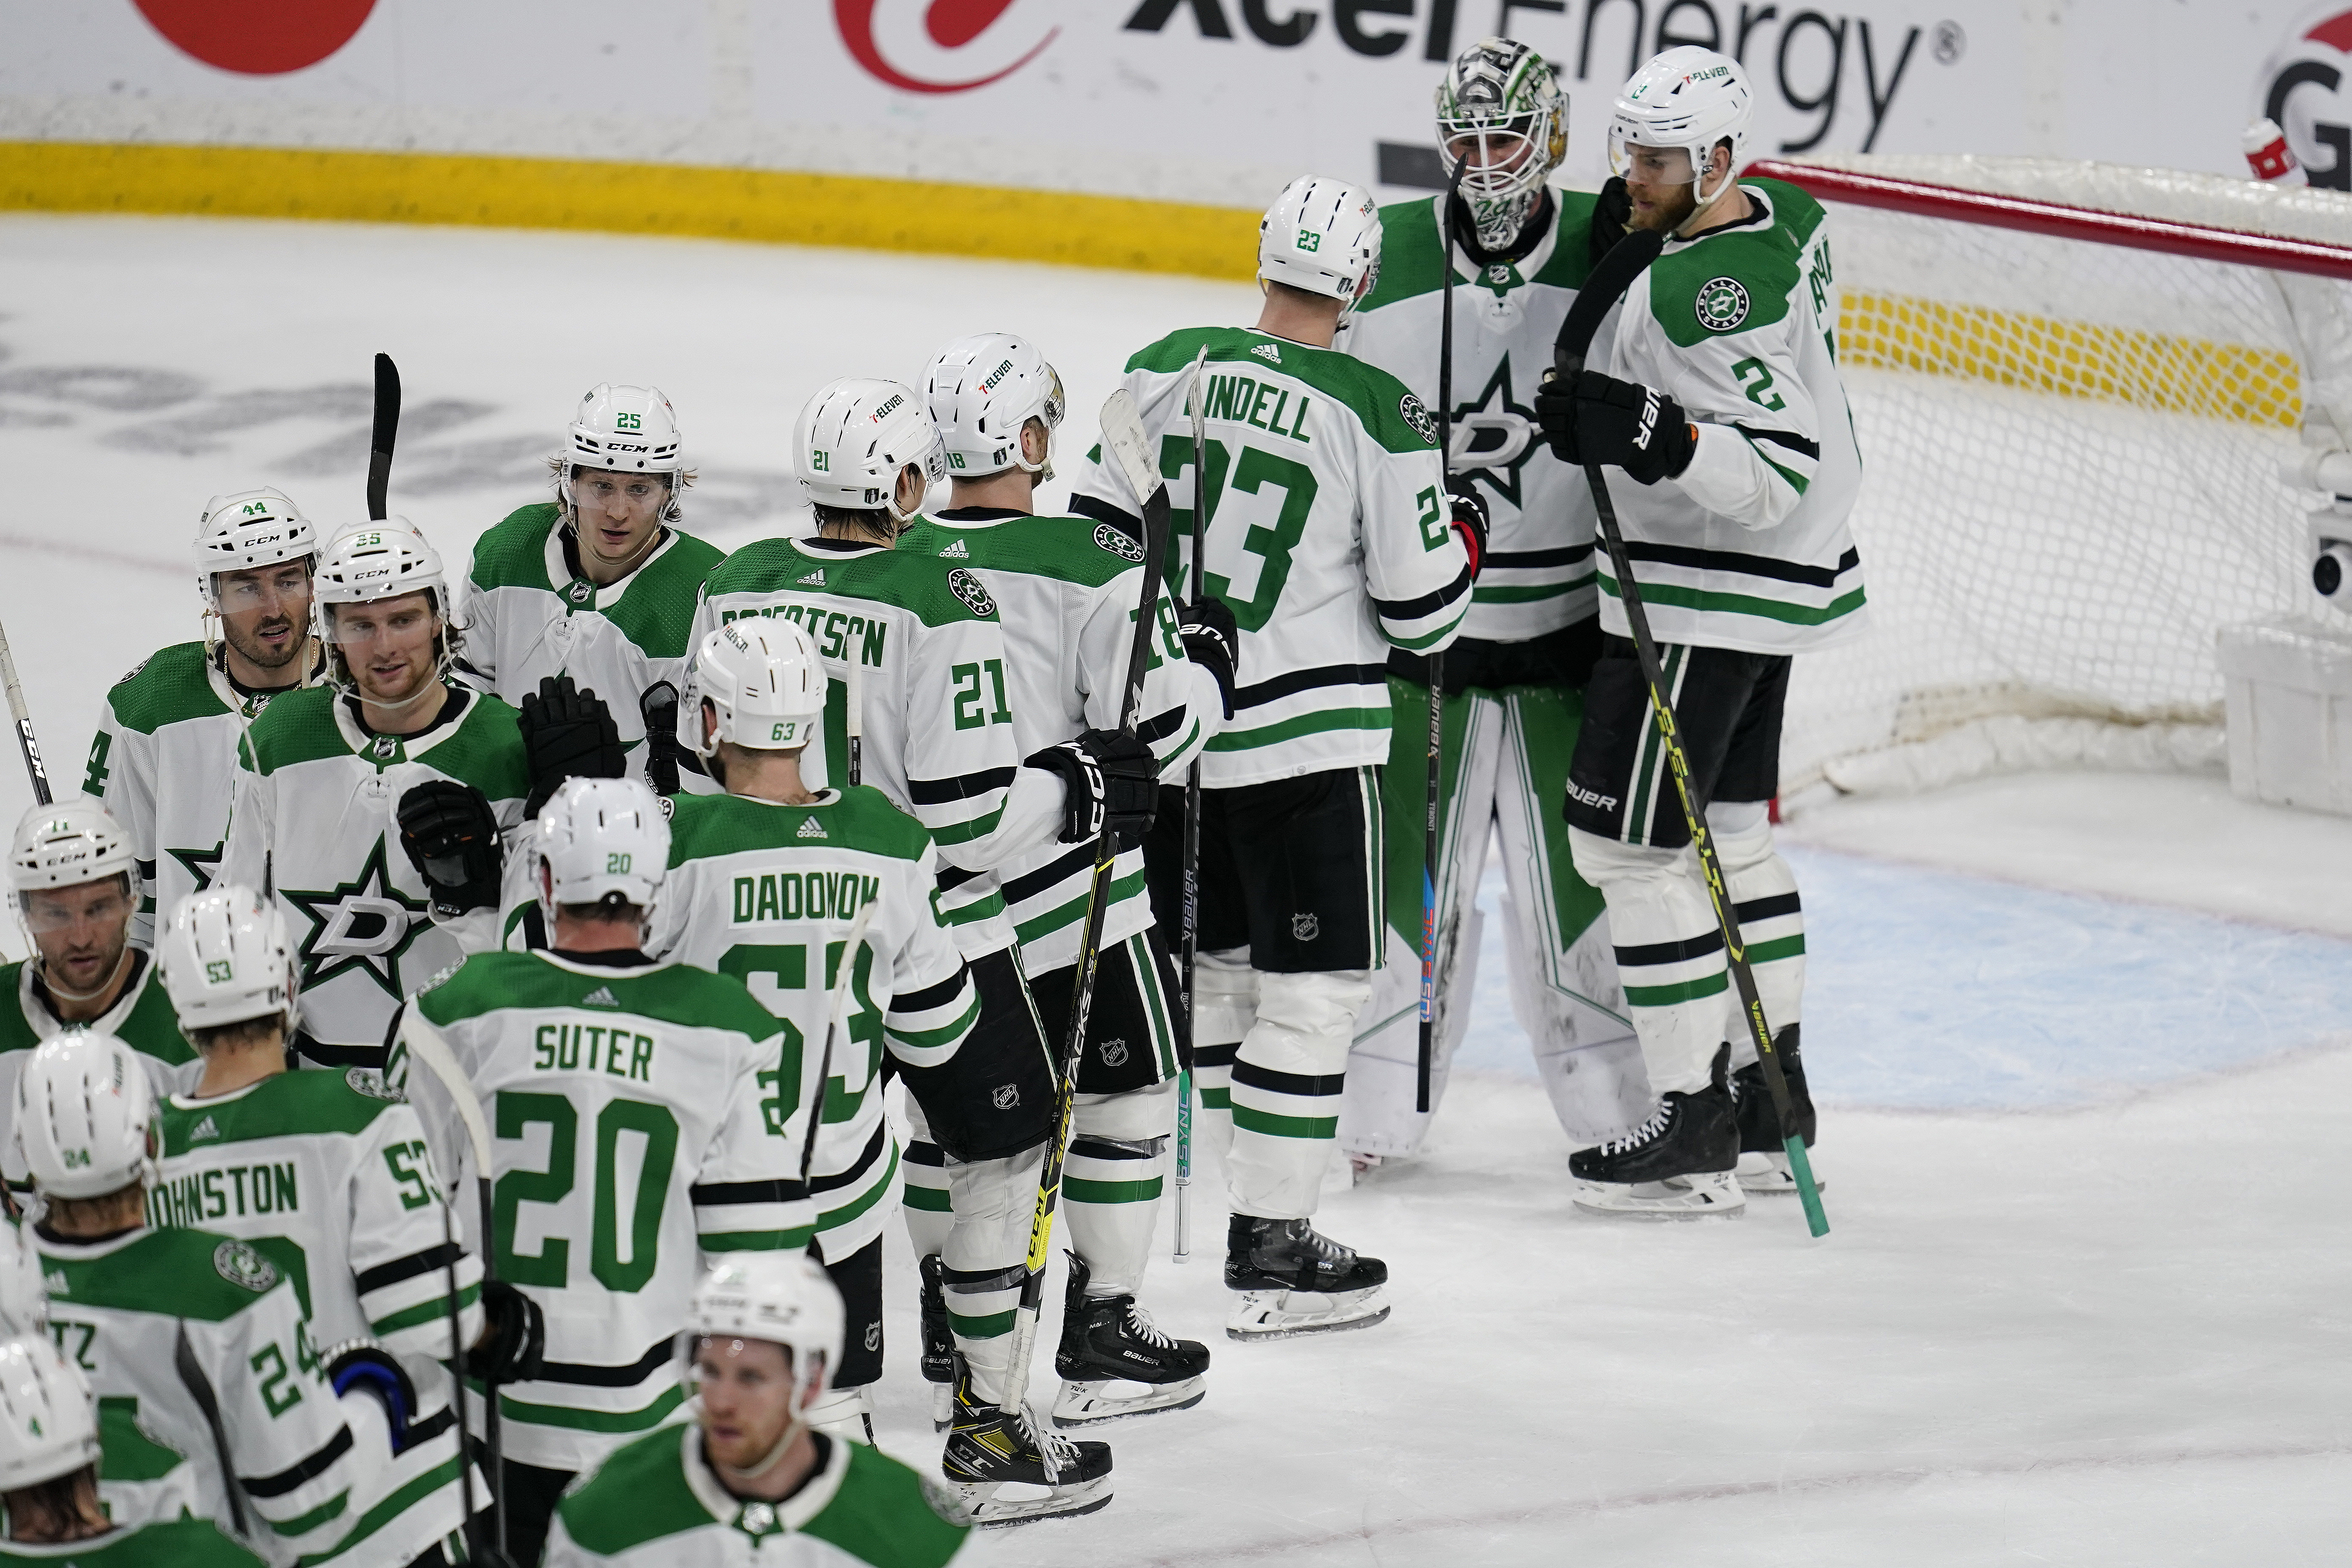 Stars close out Wild in Game 6 with force, showing potential for deep  playoff run